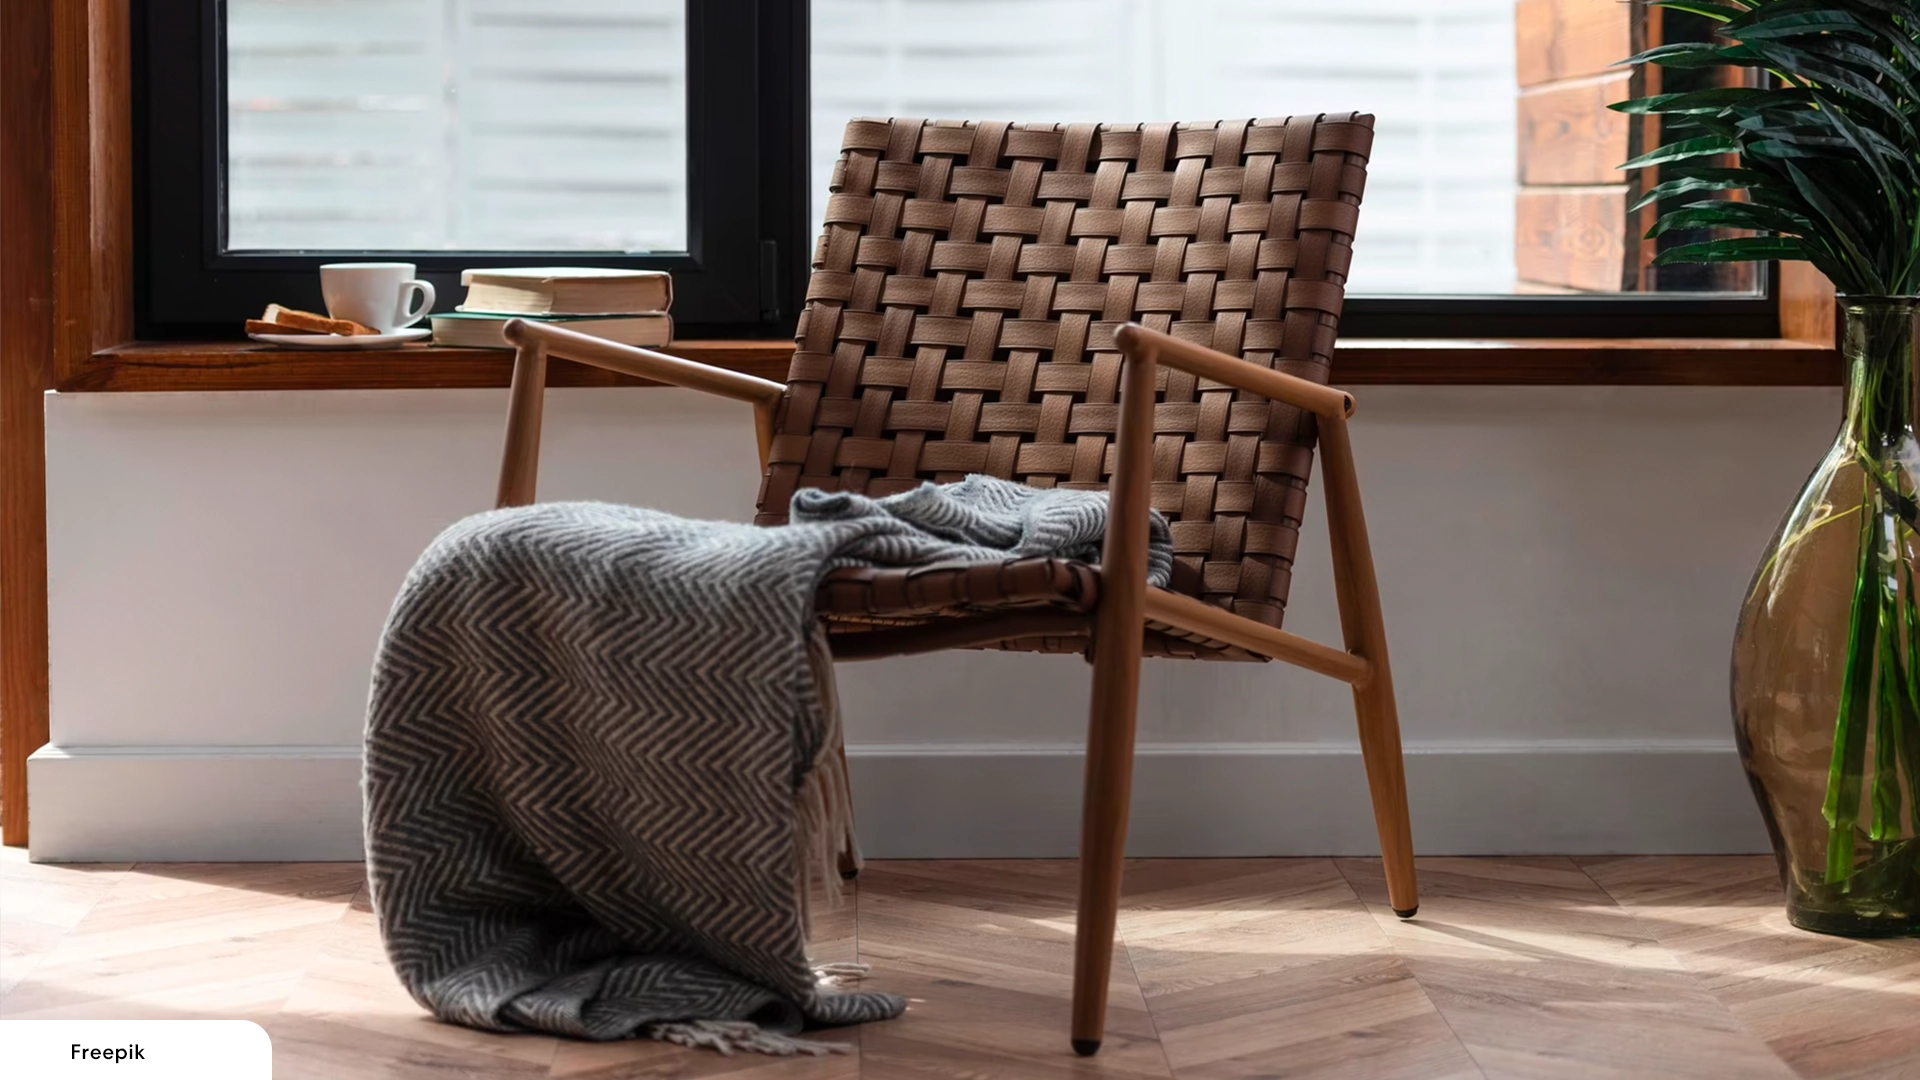 Tips to Keep Your Rattan Chairs Clean